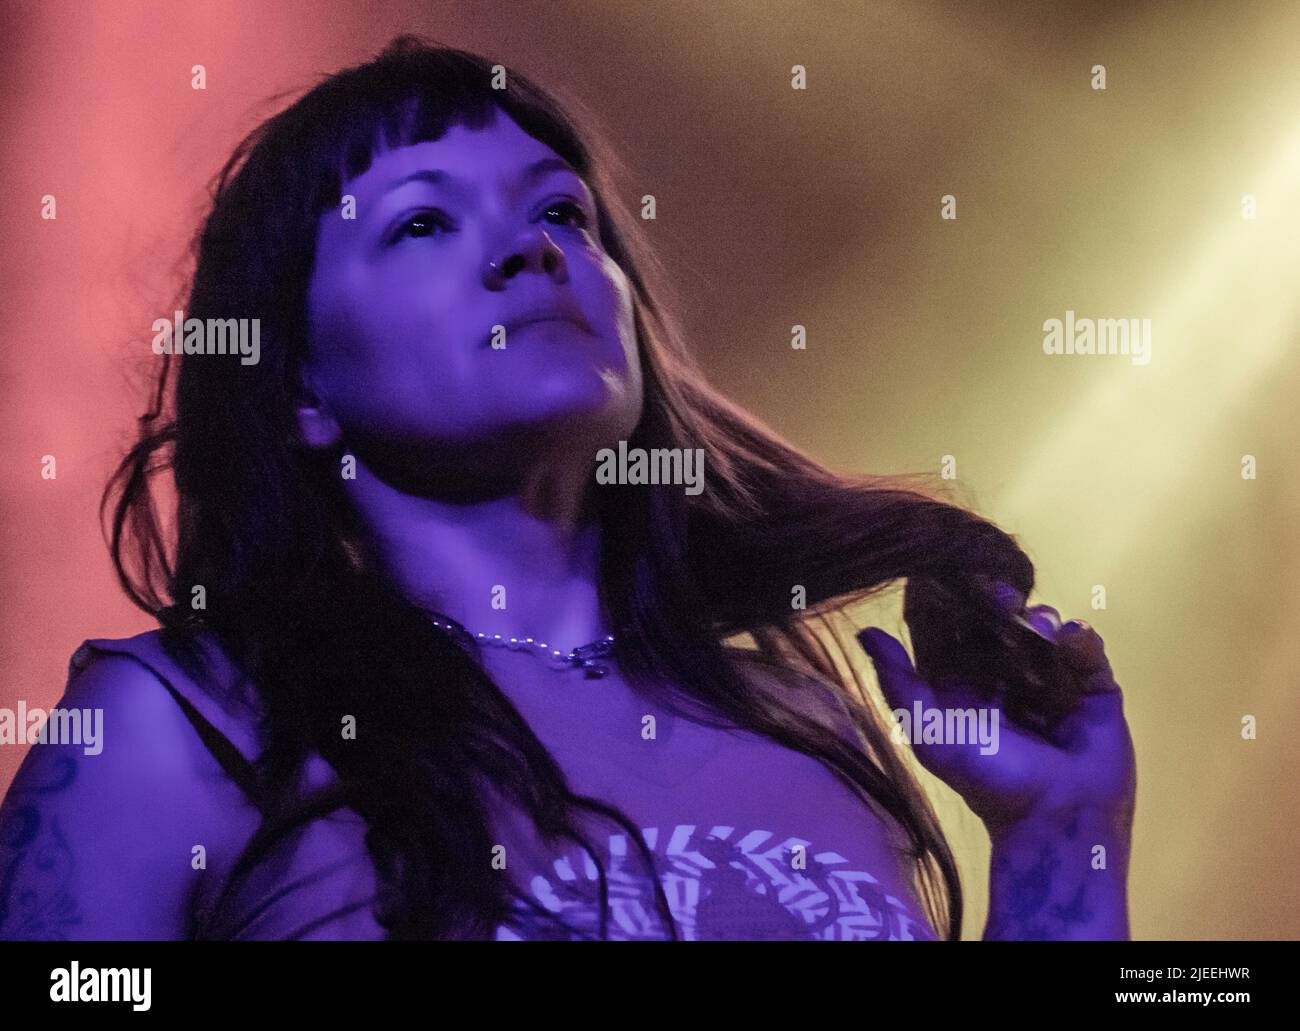 Leeds, UK. 26th June, 2022. Zia McCabe, keyboardist and bass player of The Dandy Warhols, performing live at Stylus in Leeds University. Picture Credit: ernesto rogata/Alamy Live News Stock Photo